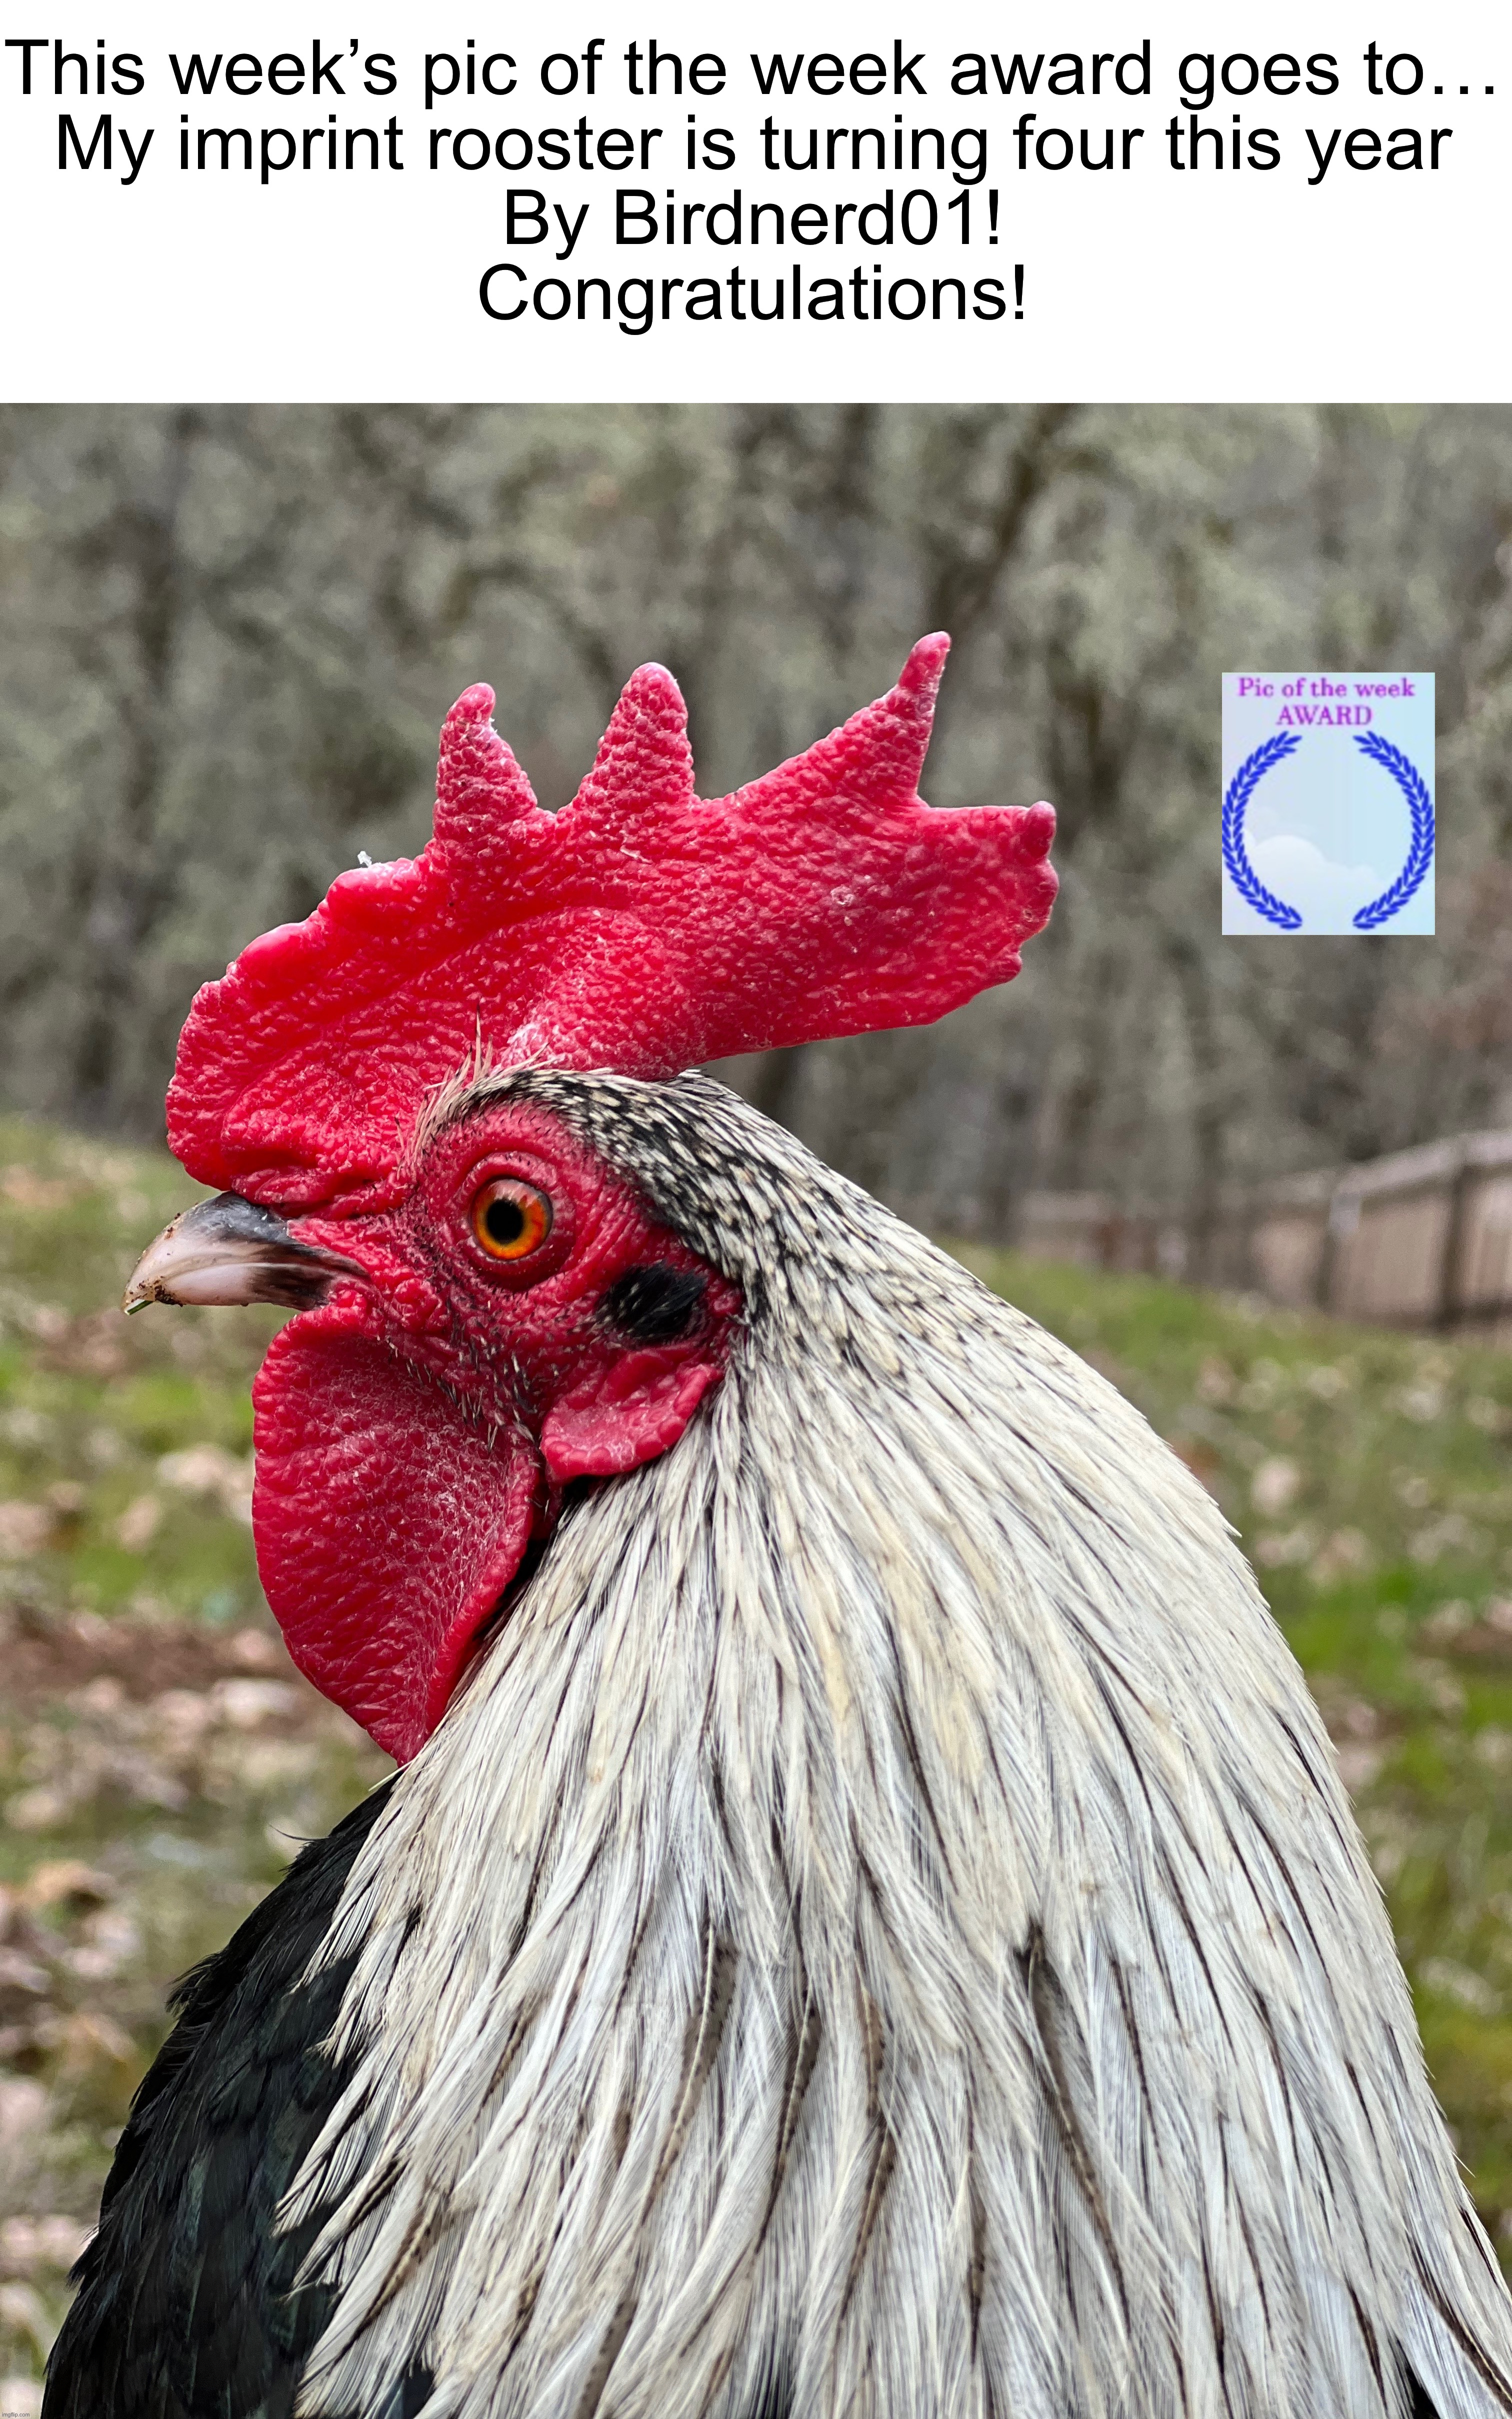 My imprint rooster is turning four this year by @Birdnerd01 https://imgflip.com/i/7f3fbb | This week’s pic of the week award goes to…
My imprint rooster is turning four this year
By Birdnerd01!
Congratulations! | image tagged in share your own photos | made w/ Imgflip meme maker